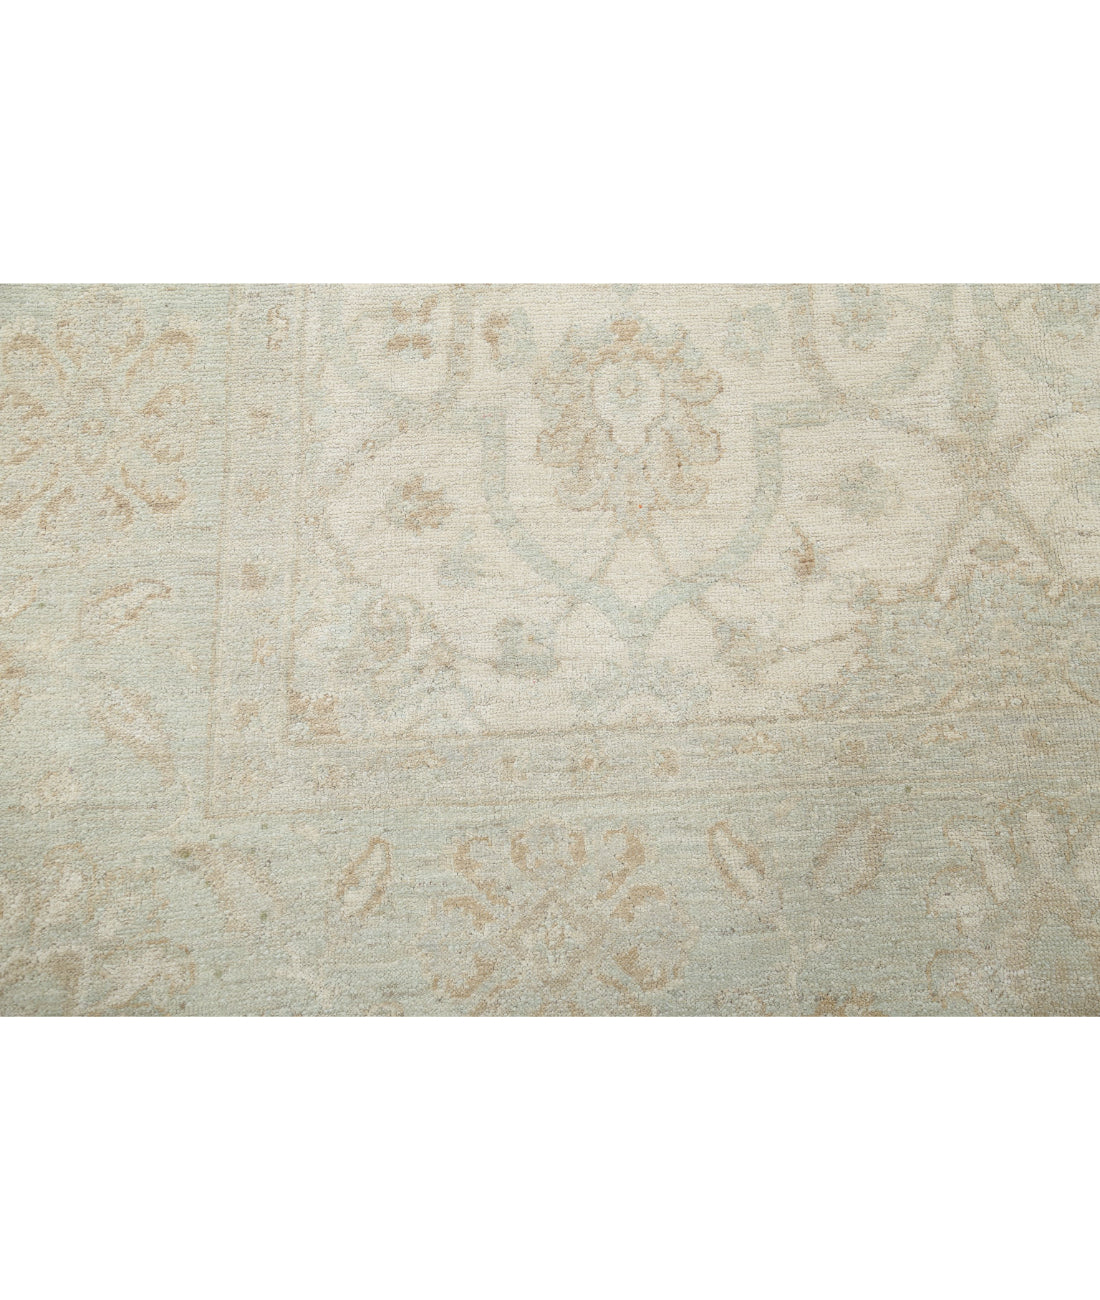 Hand Knotted Serenity Wool Rug - 6'0'' x 8'7'' 6'0'' x 8'7'' (180 X 258) / Ivory / Green